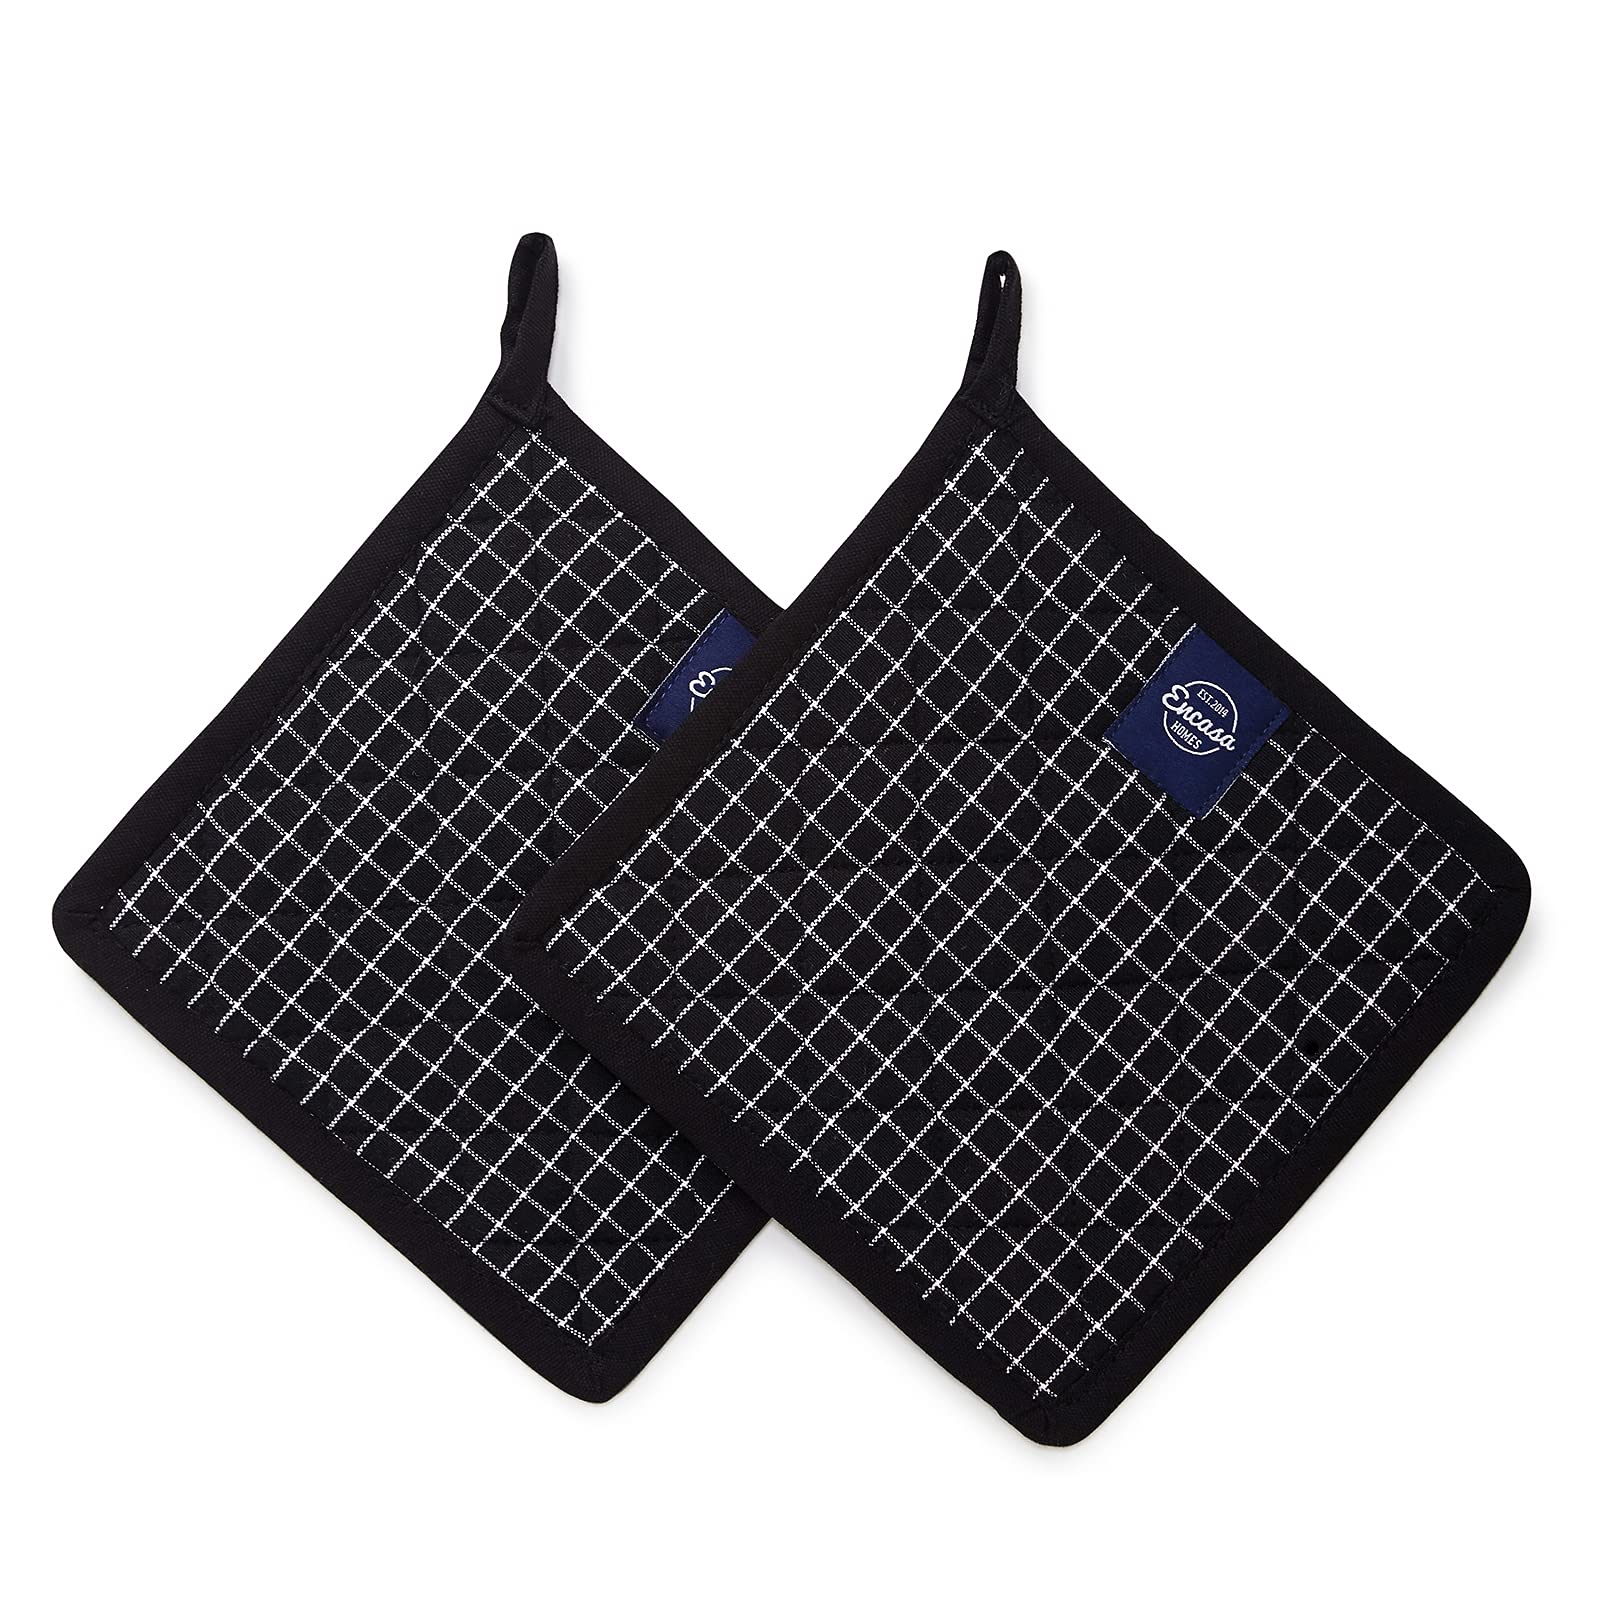 Encasa Homes 8 inches Oven Microwave Potholders (2 pc Set) for Kitchen Cooking & Baking - Heat Resistant, Thick & Safe, Protection of Hands from Hot Utensils - Butcher Checks Black